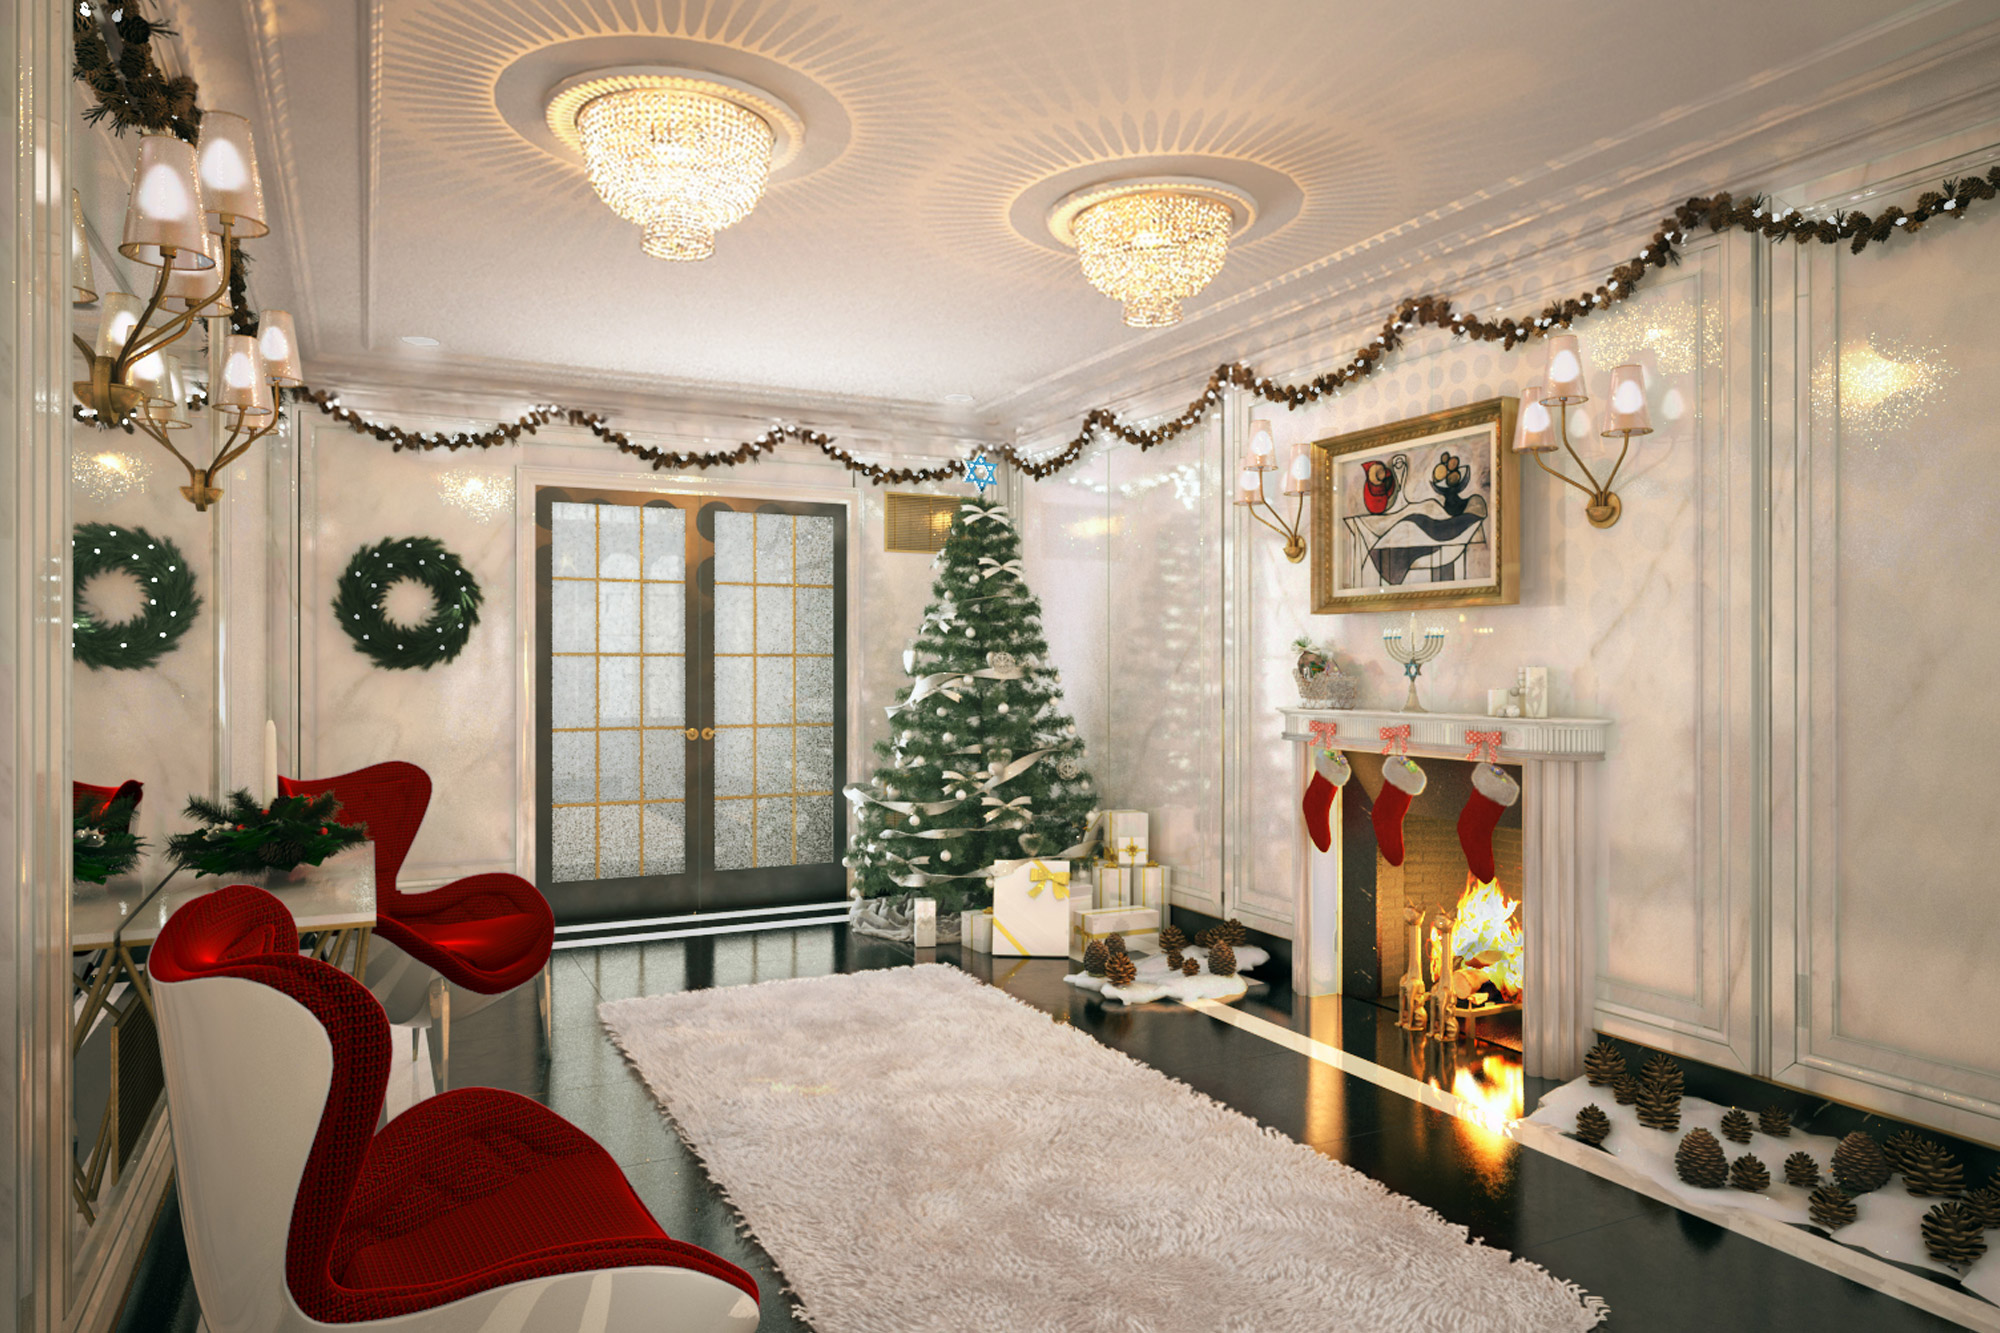 Lobby Renovation in an UES Pre-War Apartment Building - Rendering For the Holidays